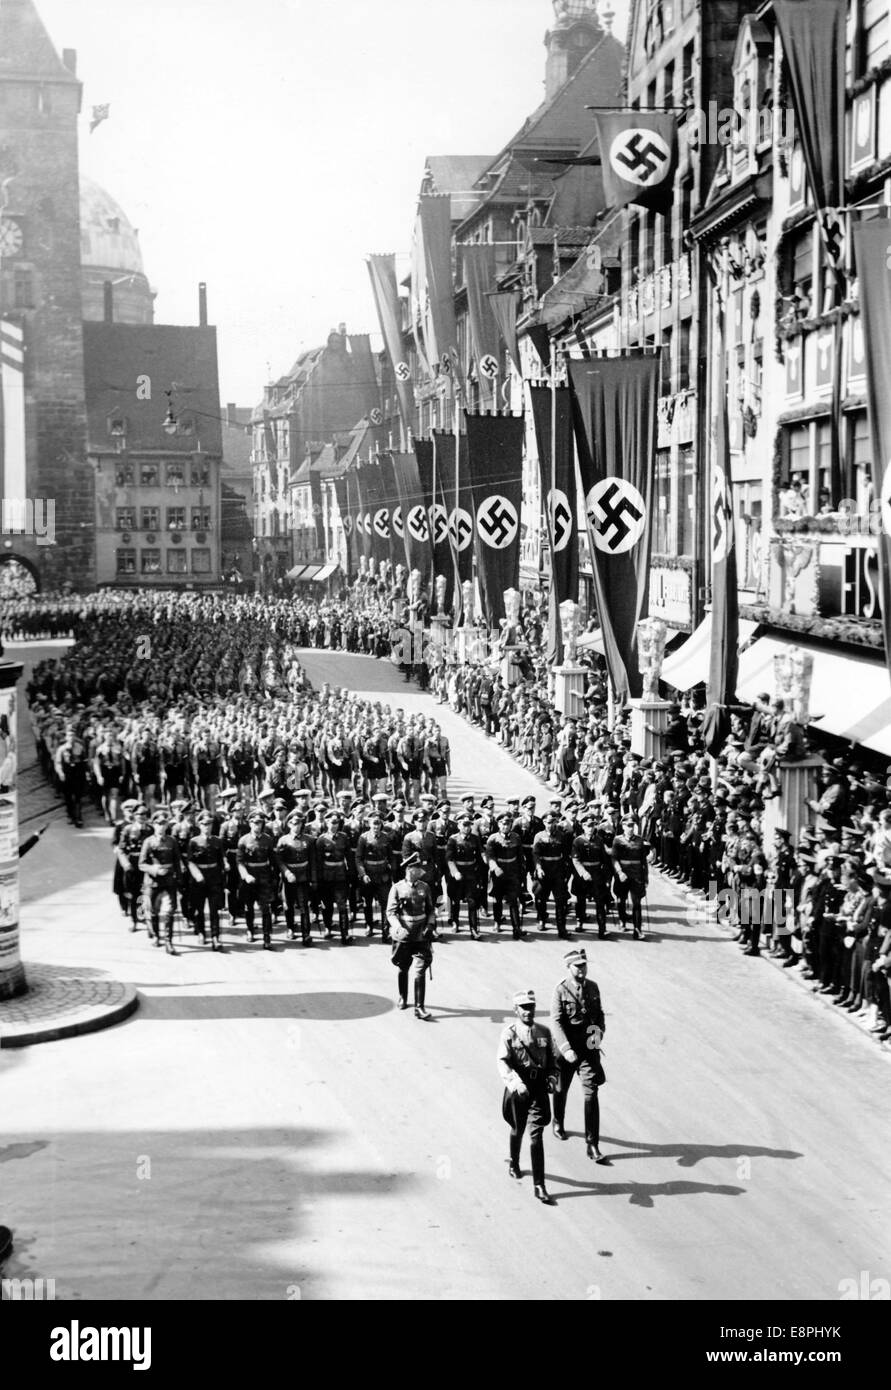 Nuremberg Rally 1938 in Nuremberg, Germany - So-called 'March of the 120,000' (selected members of the NSDAP and their groups) on Adolf-Hitler-Square (hauptmarkt), here Reich Sports Leader Hans von Tschammer und Osten ahead of the winners of the paramilitary sports and Hitler Youth competitions. (Flaws in quality due to the historic picture copy) Fotoarchiv für Zeitgeschichtee - NO WIRE SERVICE - Stock Photo